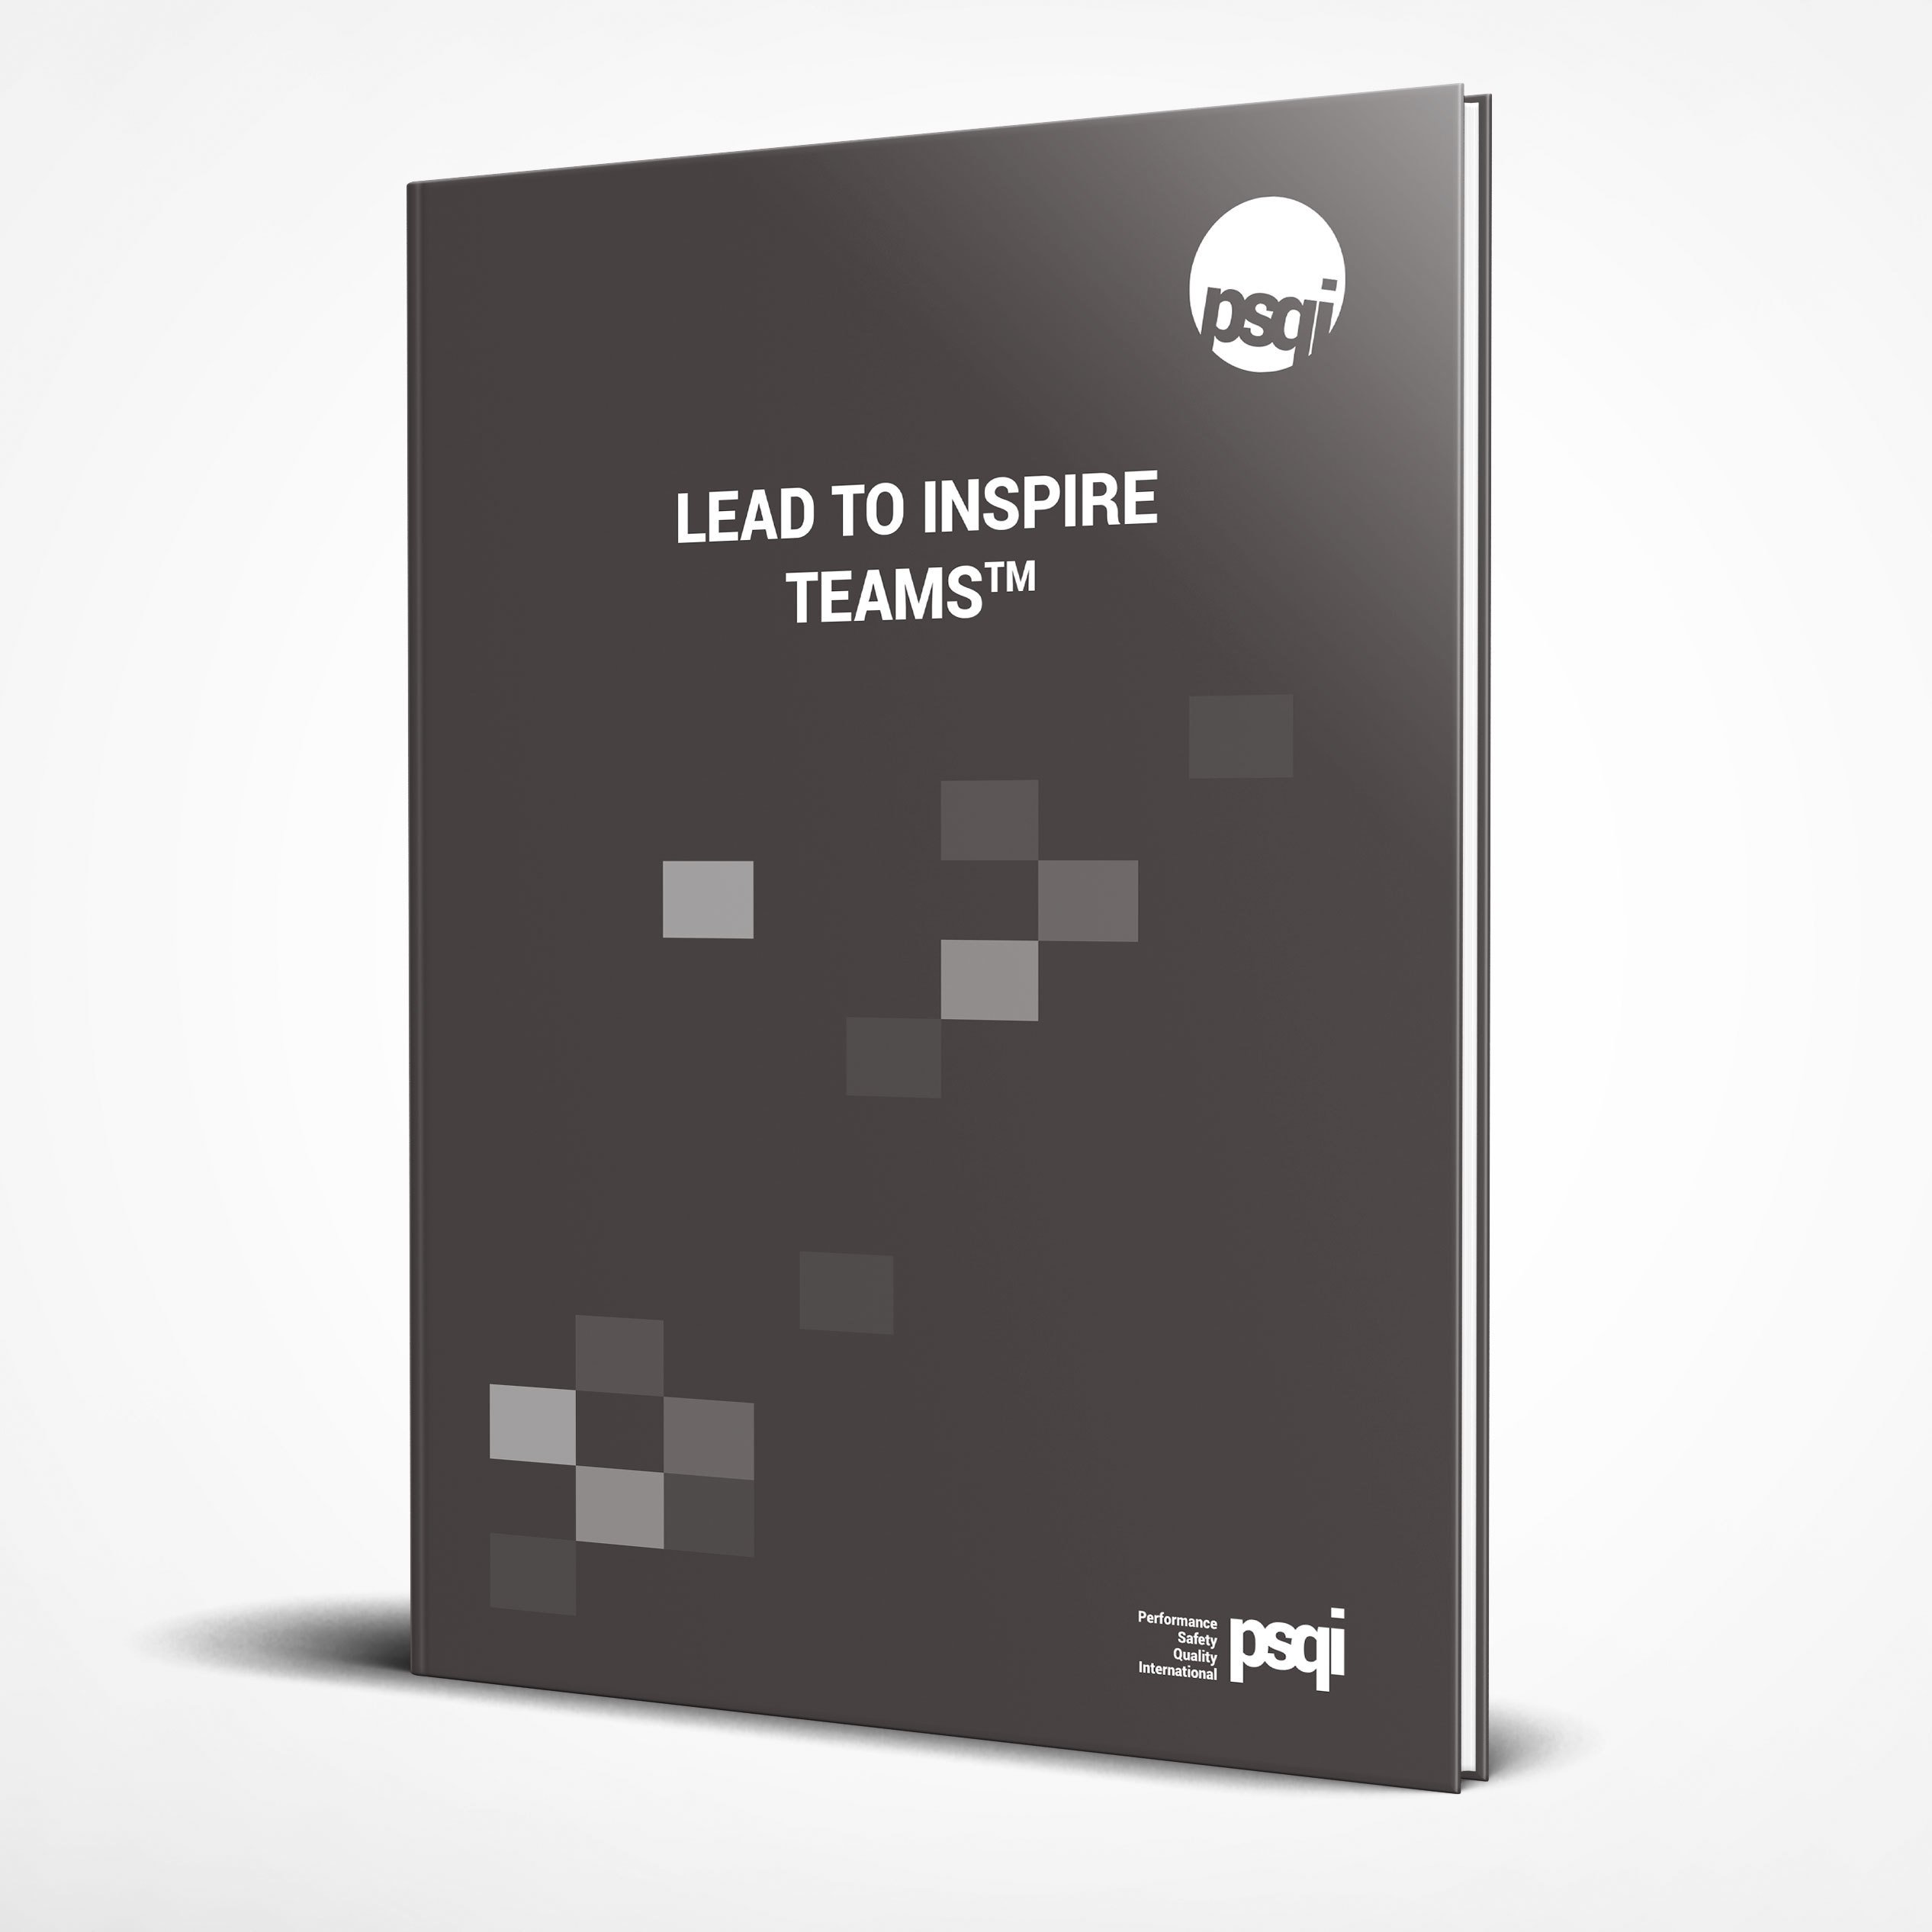 Lead_to_inspire_teams-cover